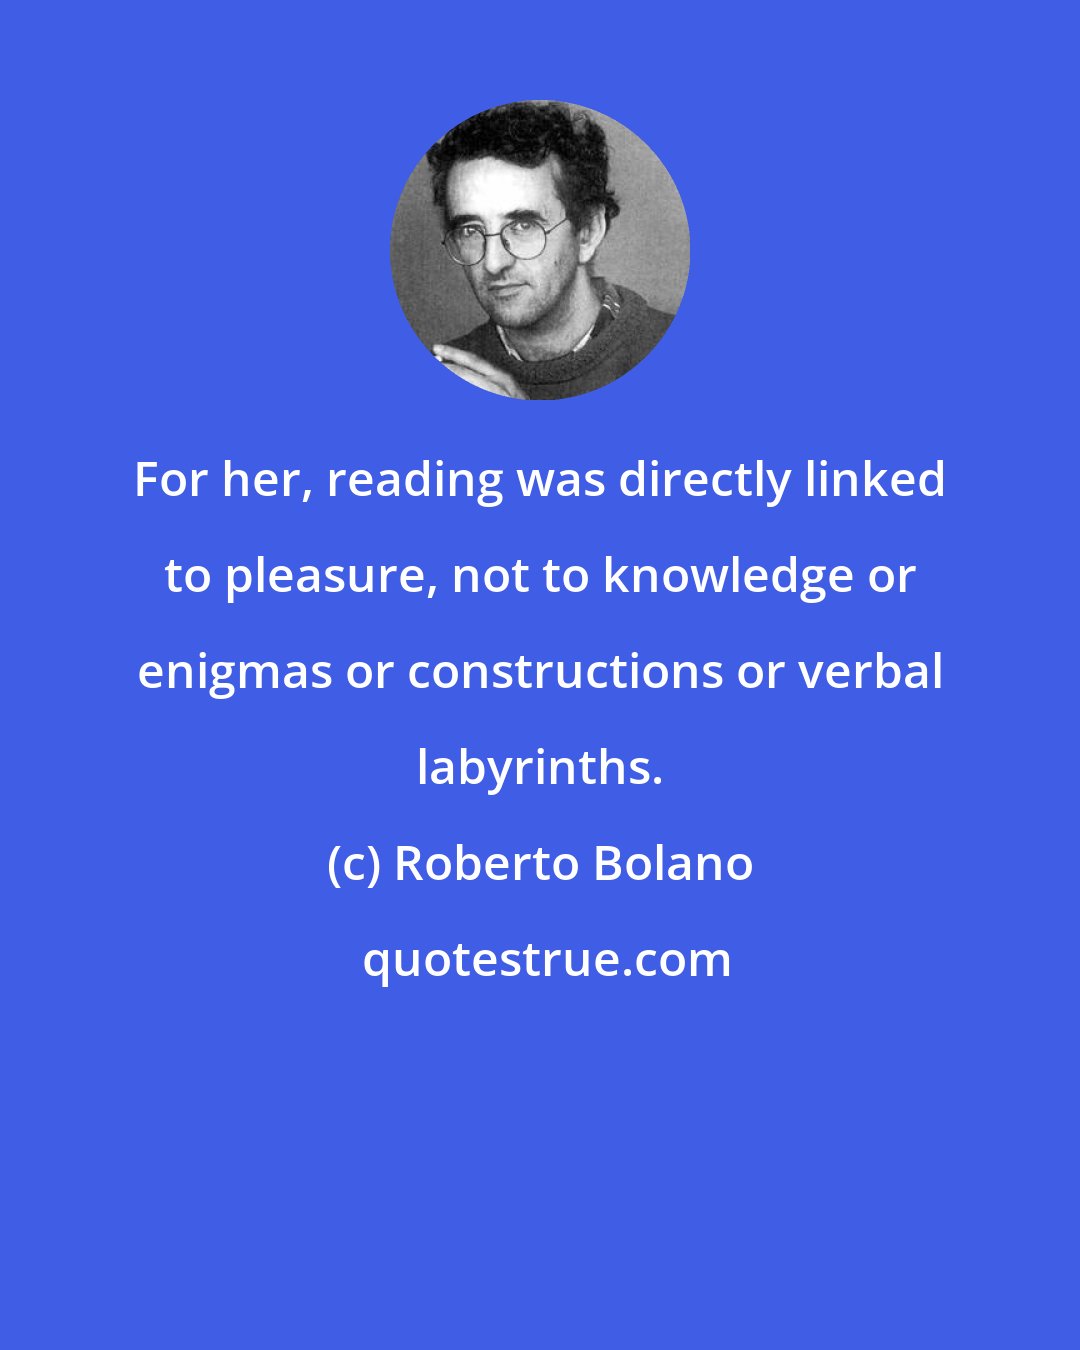 Roberto Bolano: For her, reading was directly linked to pleasure, not to knowledge or enigmas or constructions or verbal labyrinths.